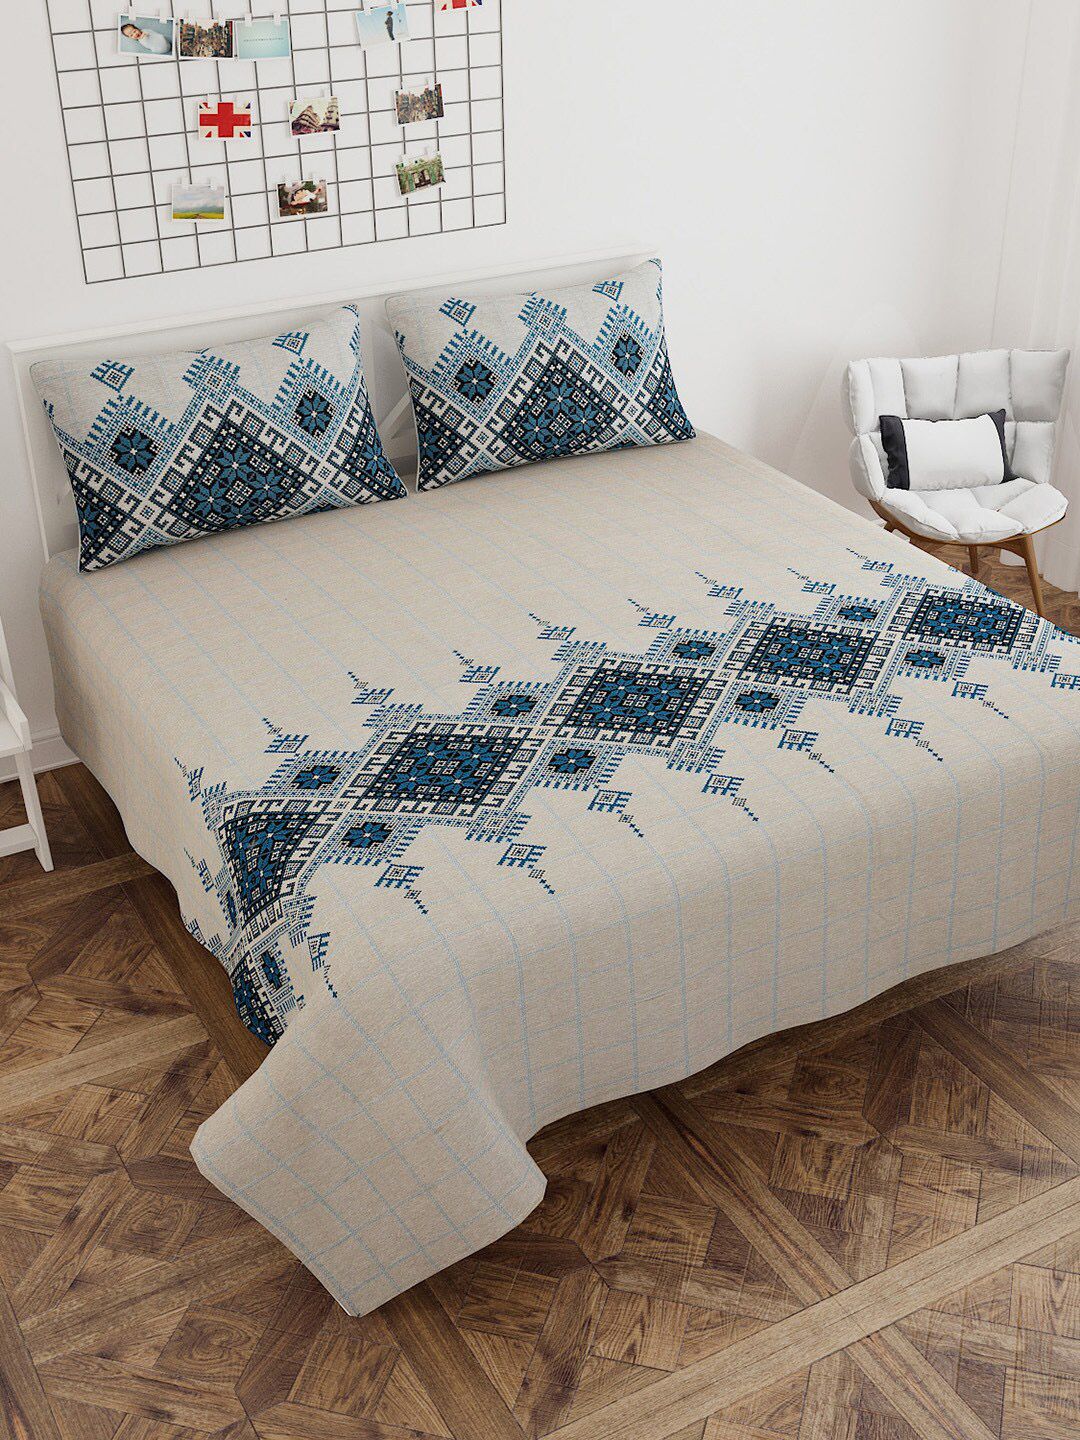 MULTITEX Off White & Blue Printed Cotton 380 GSM Bedsheet With 2 Pillow Cover Price in India